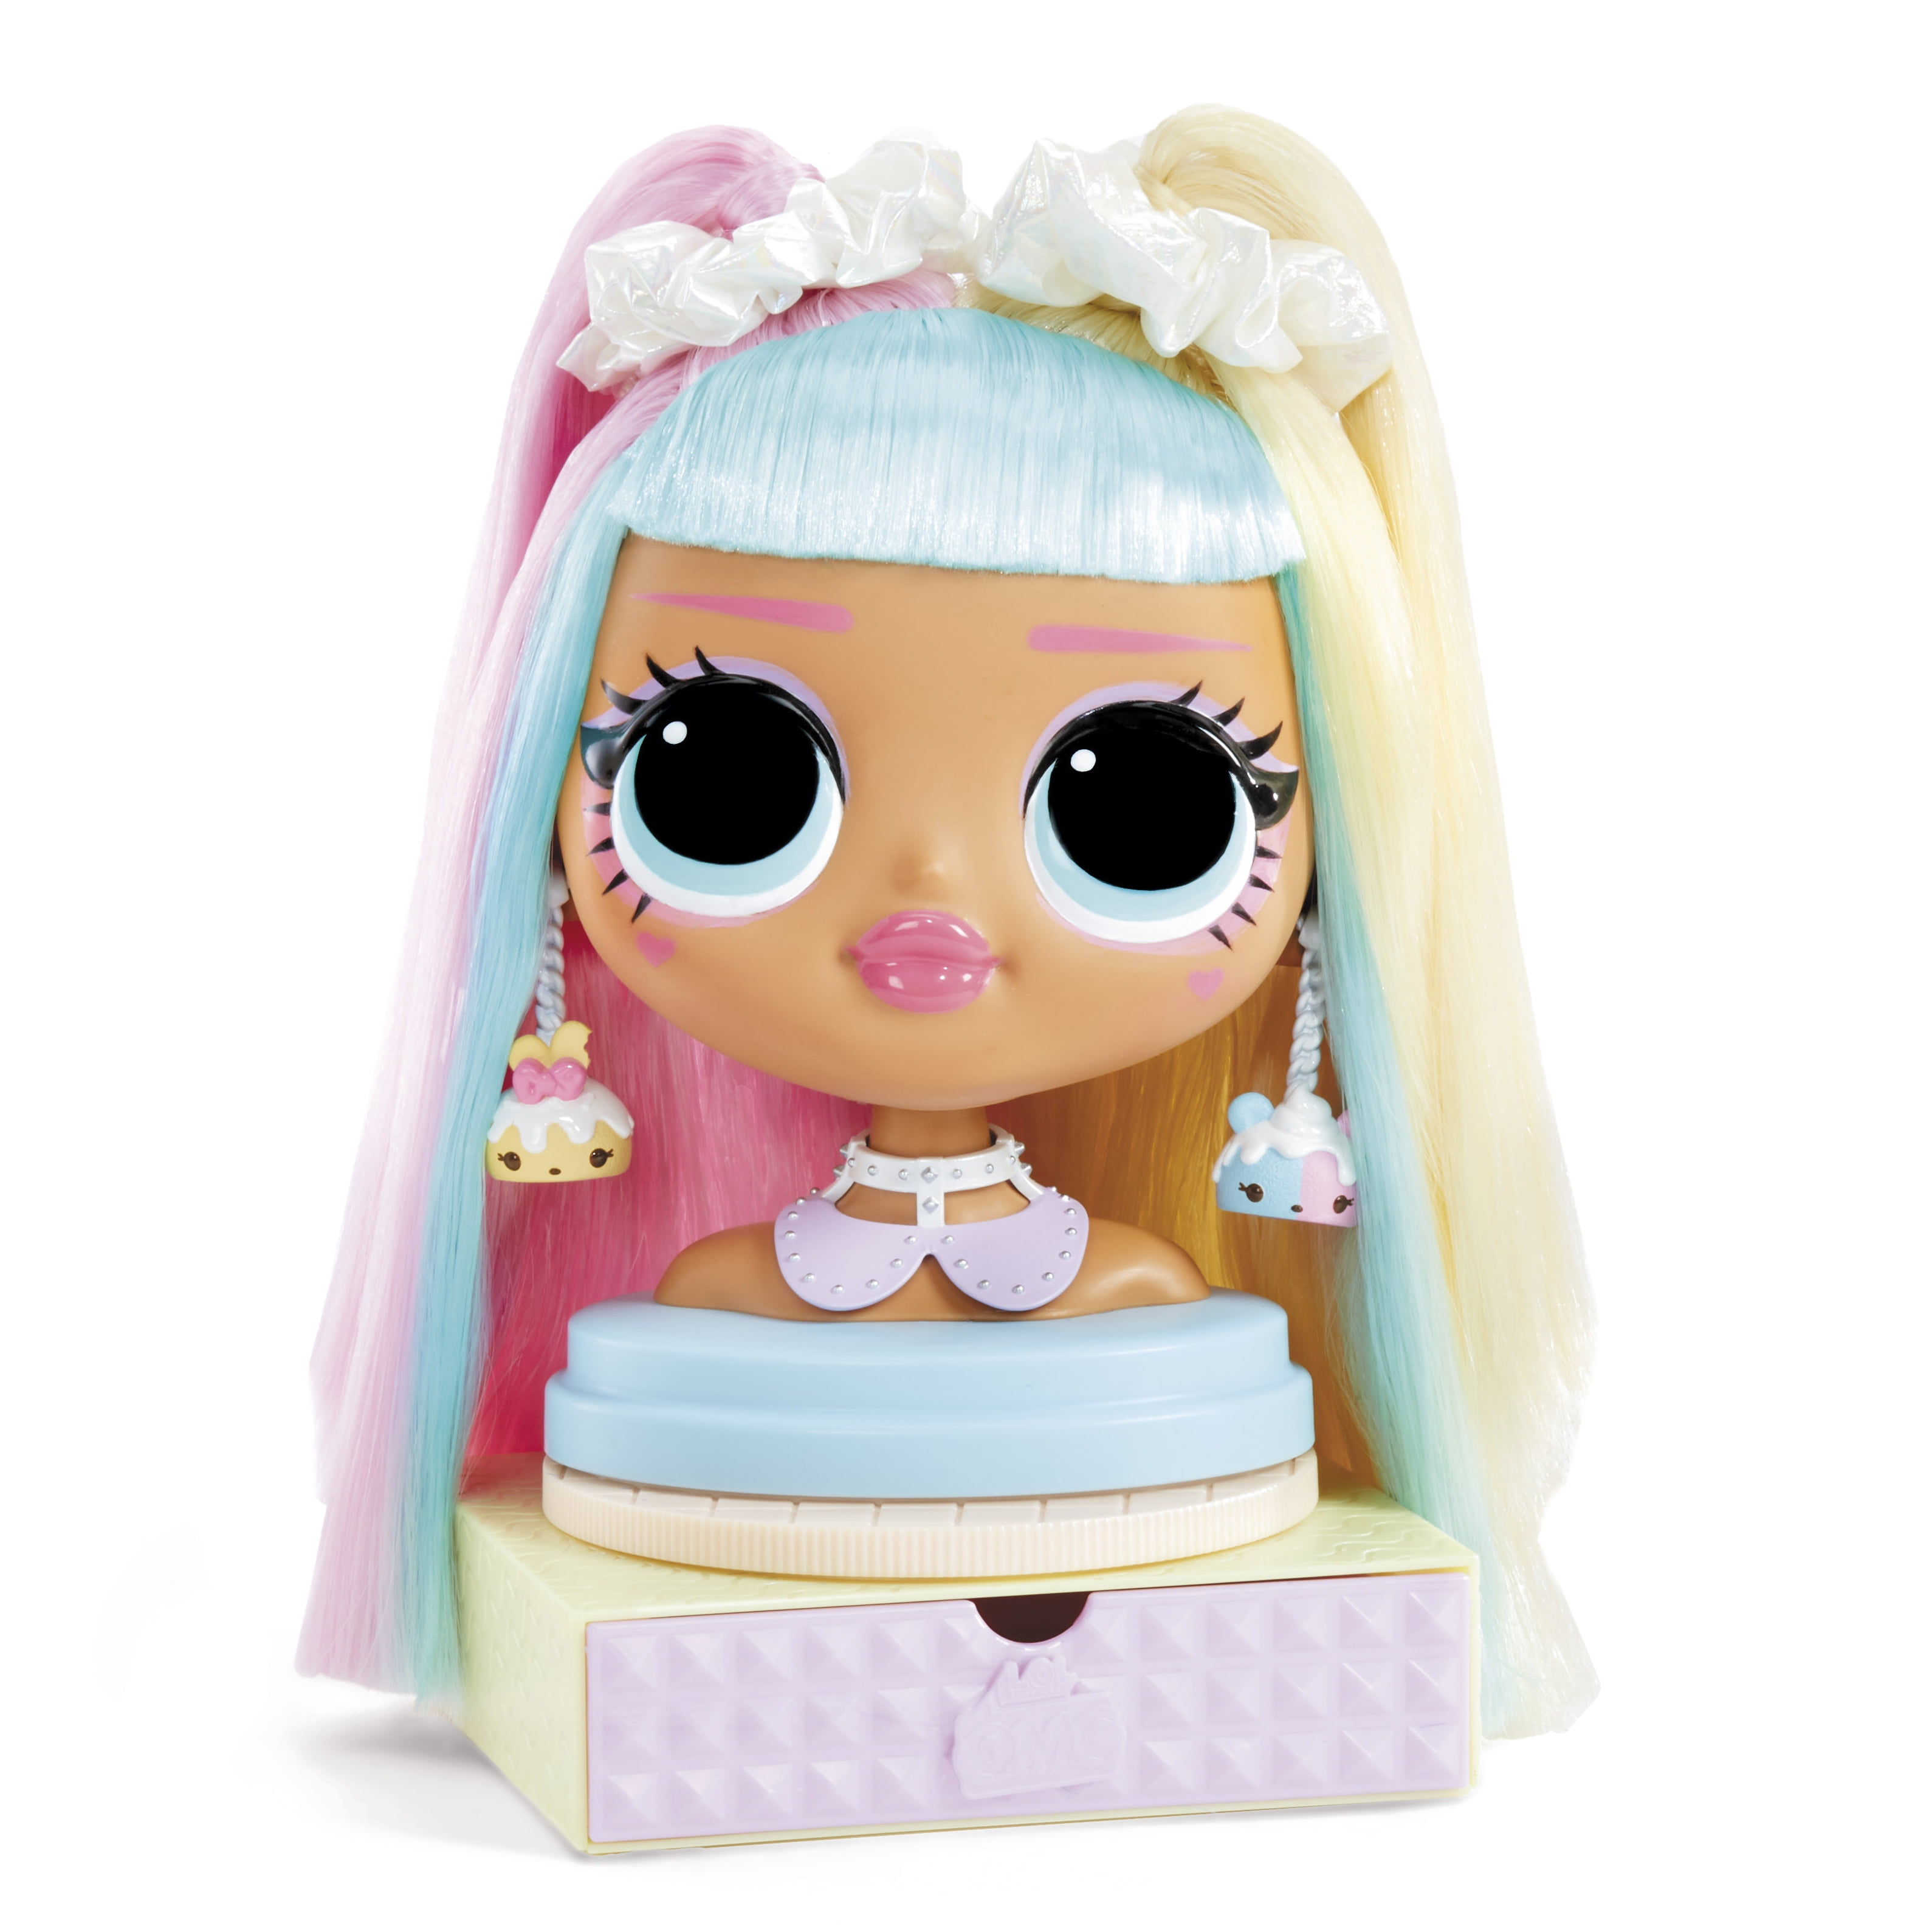 NEW LOL Surprise OMG Styling Head Doll Neonlicious 